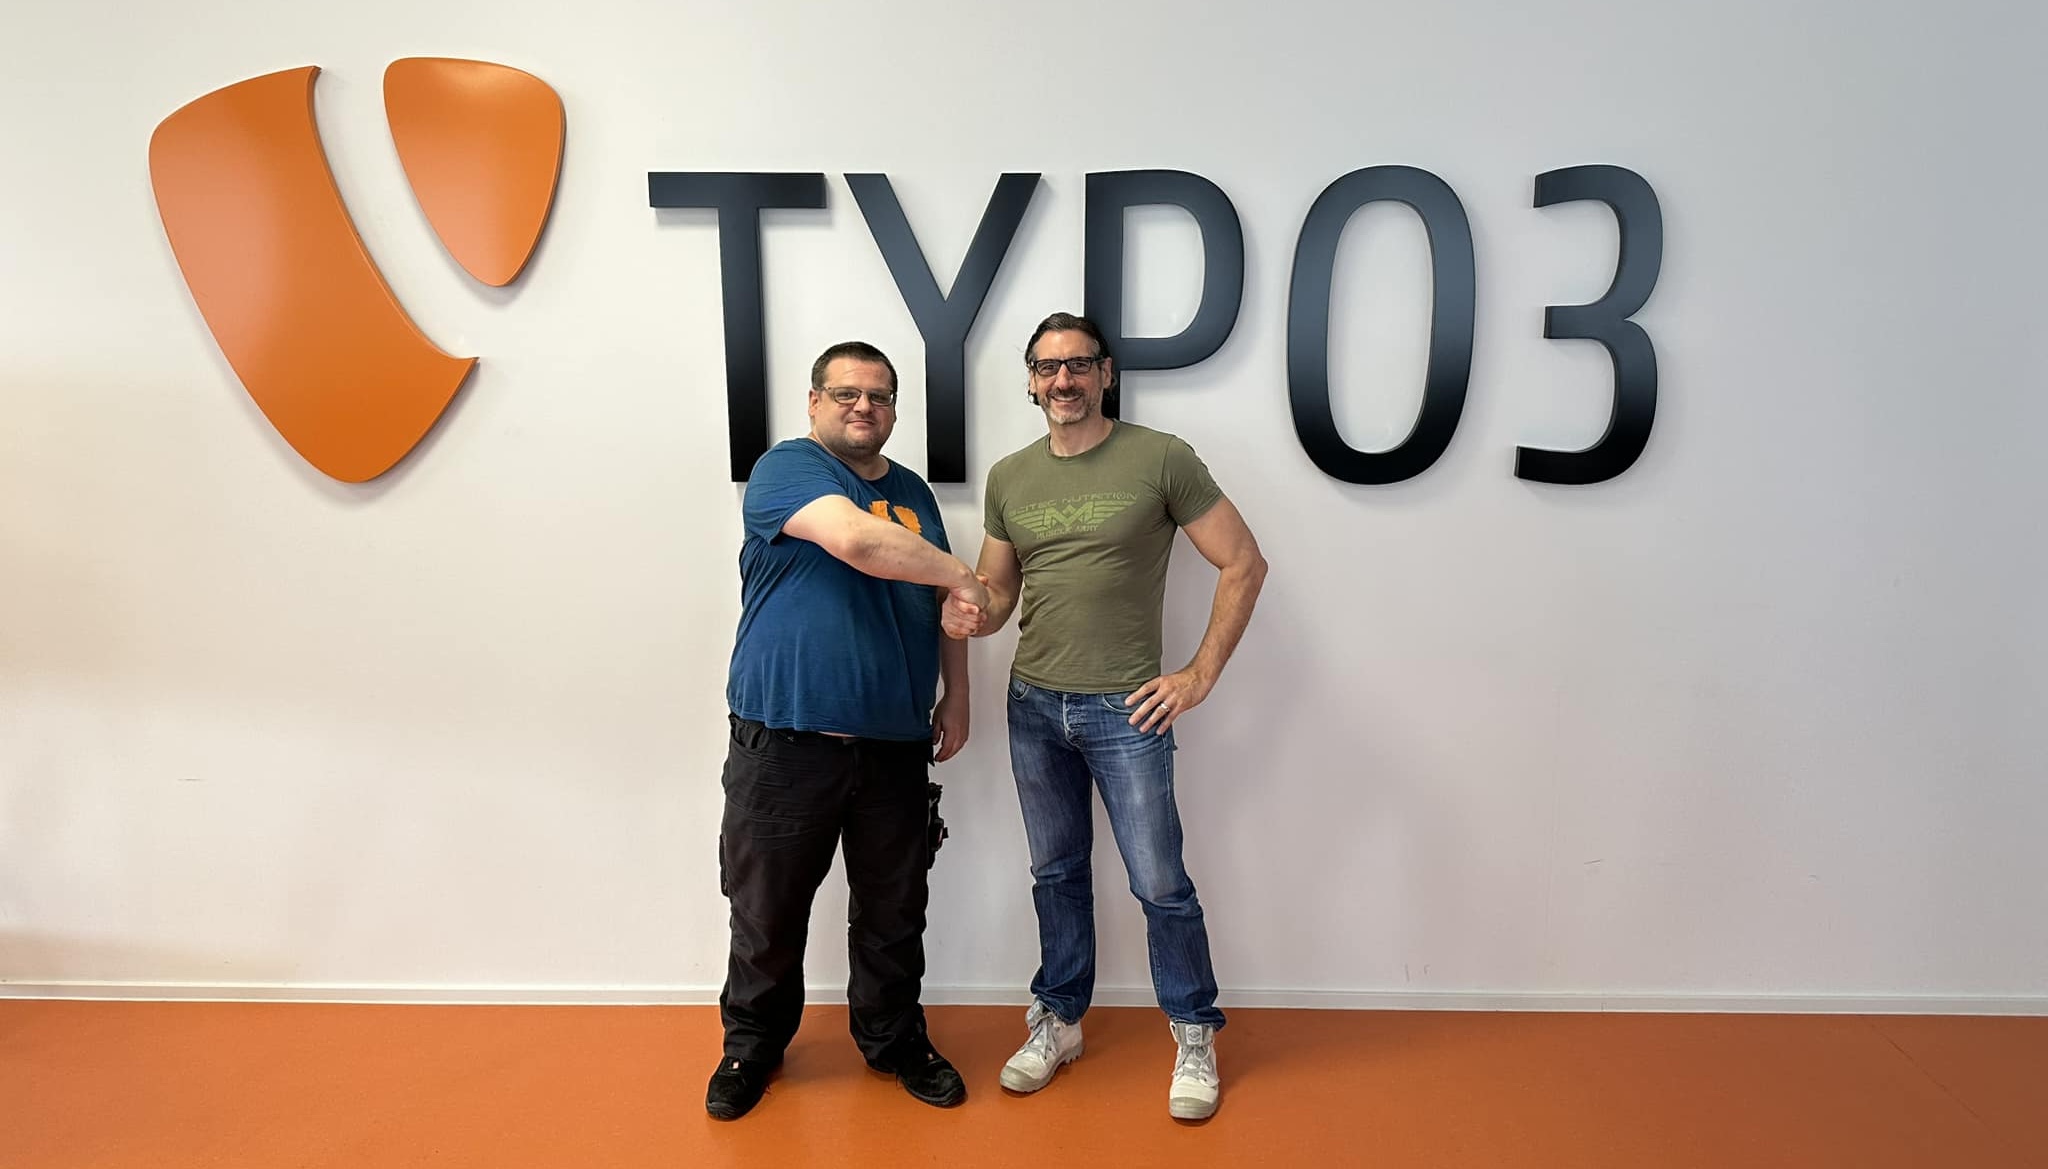 Boris Hinzer welcomes Stefan Bürk to the web-vision team on the occasion of the TYPO3 Community Sprint.